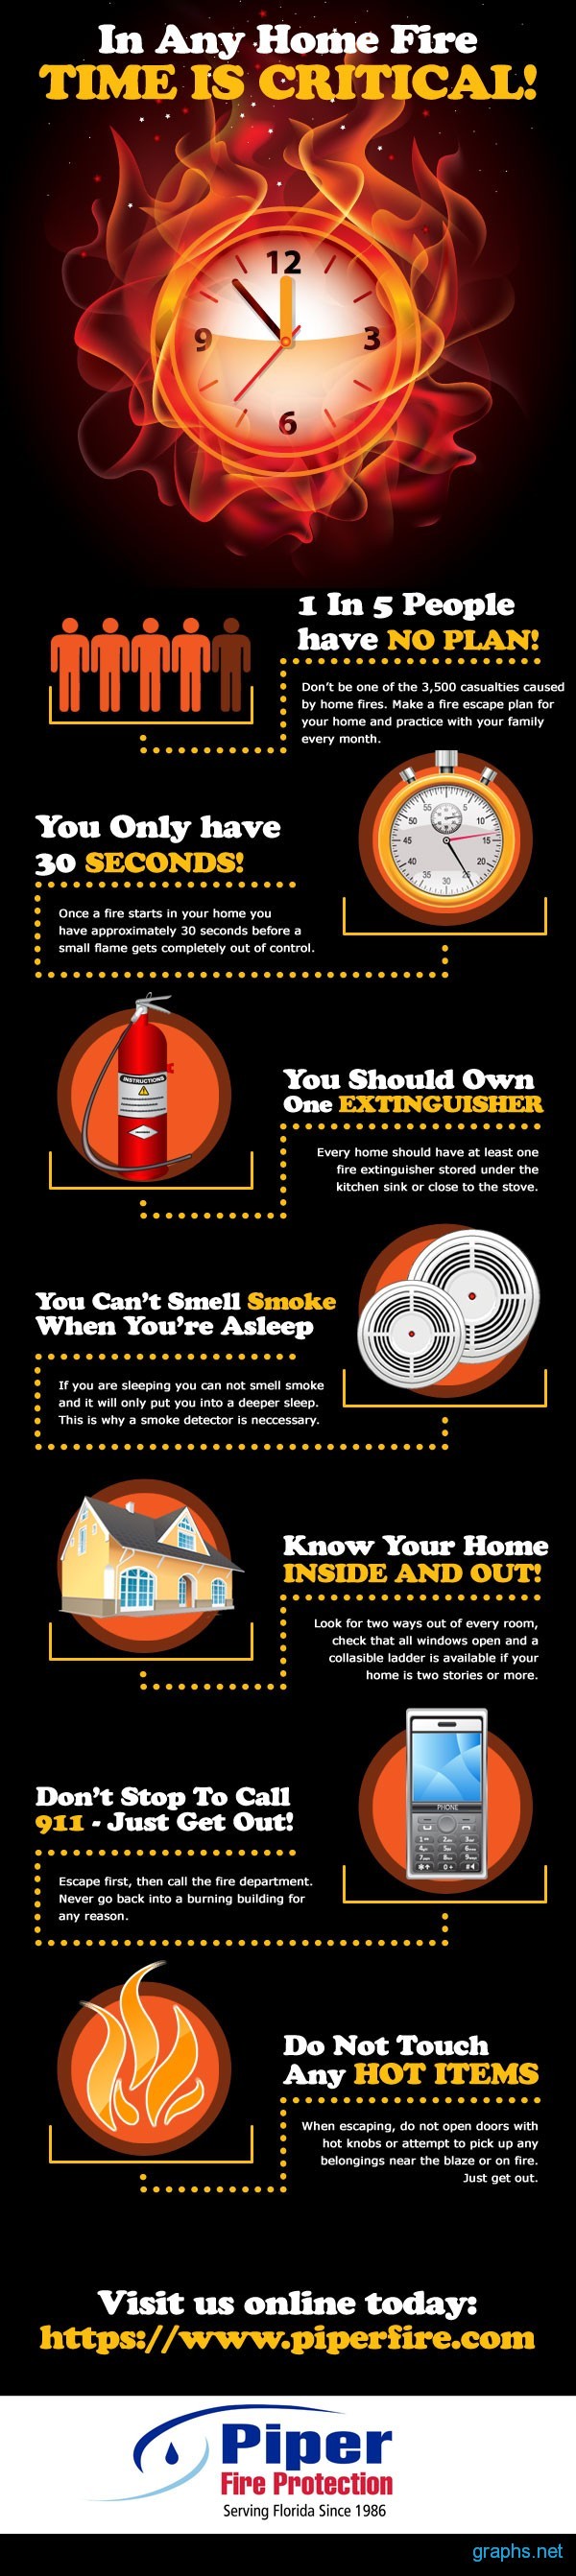 Steps to Prevent Fire at Home